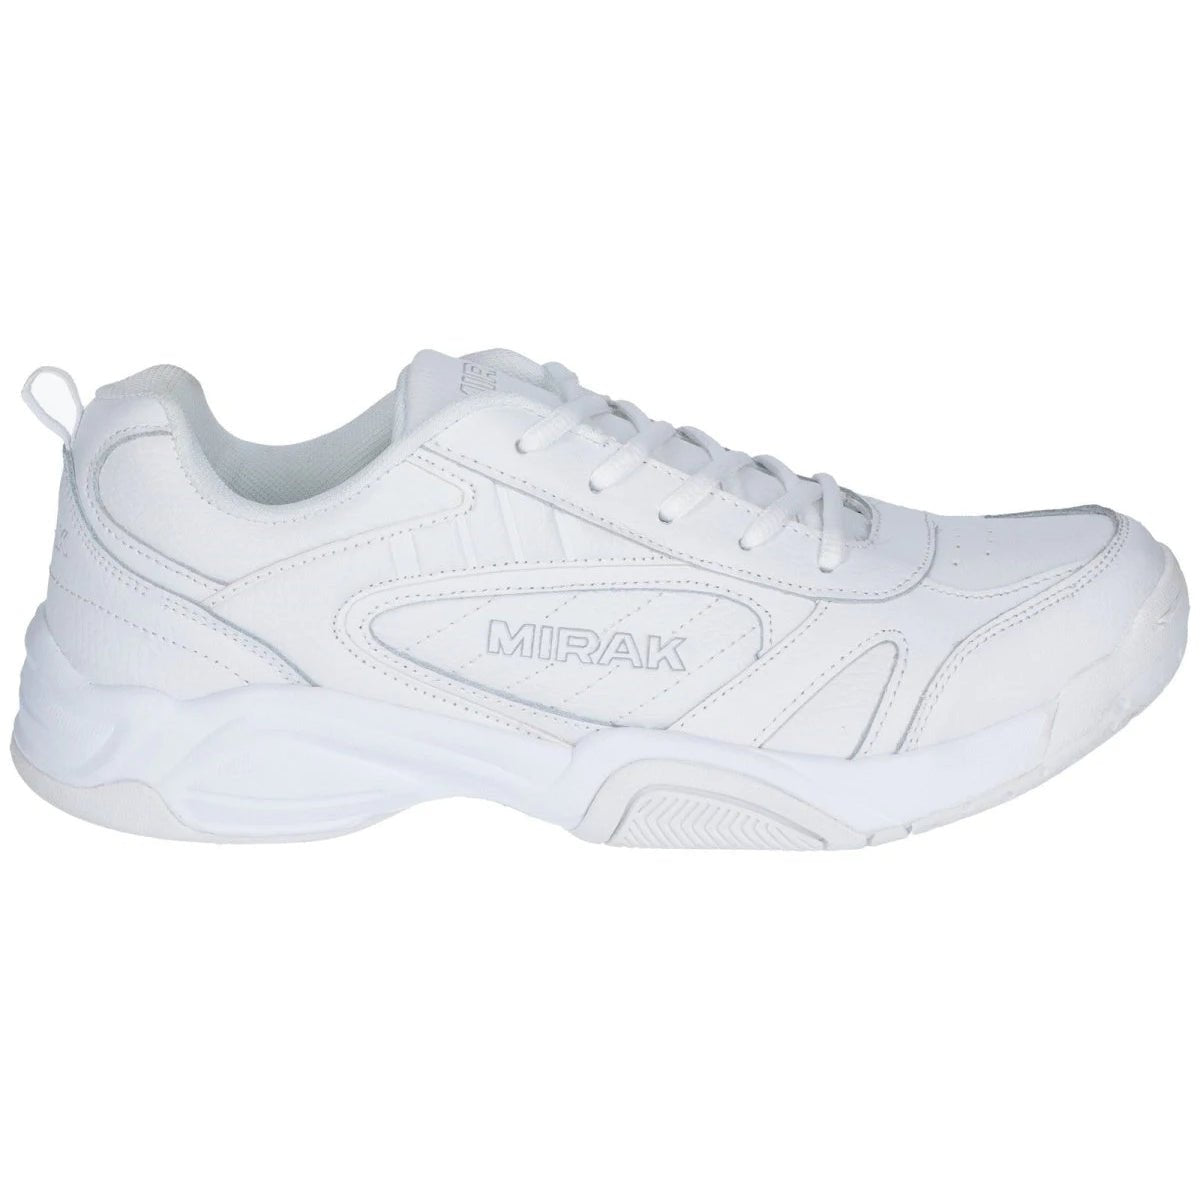 Mirak Contender Adult Lace Sports Trainers - Shoe Store Direct